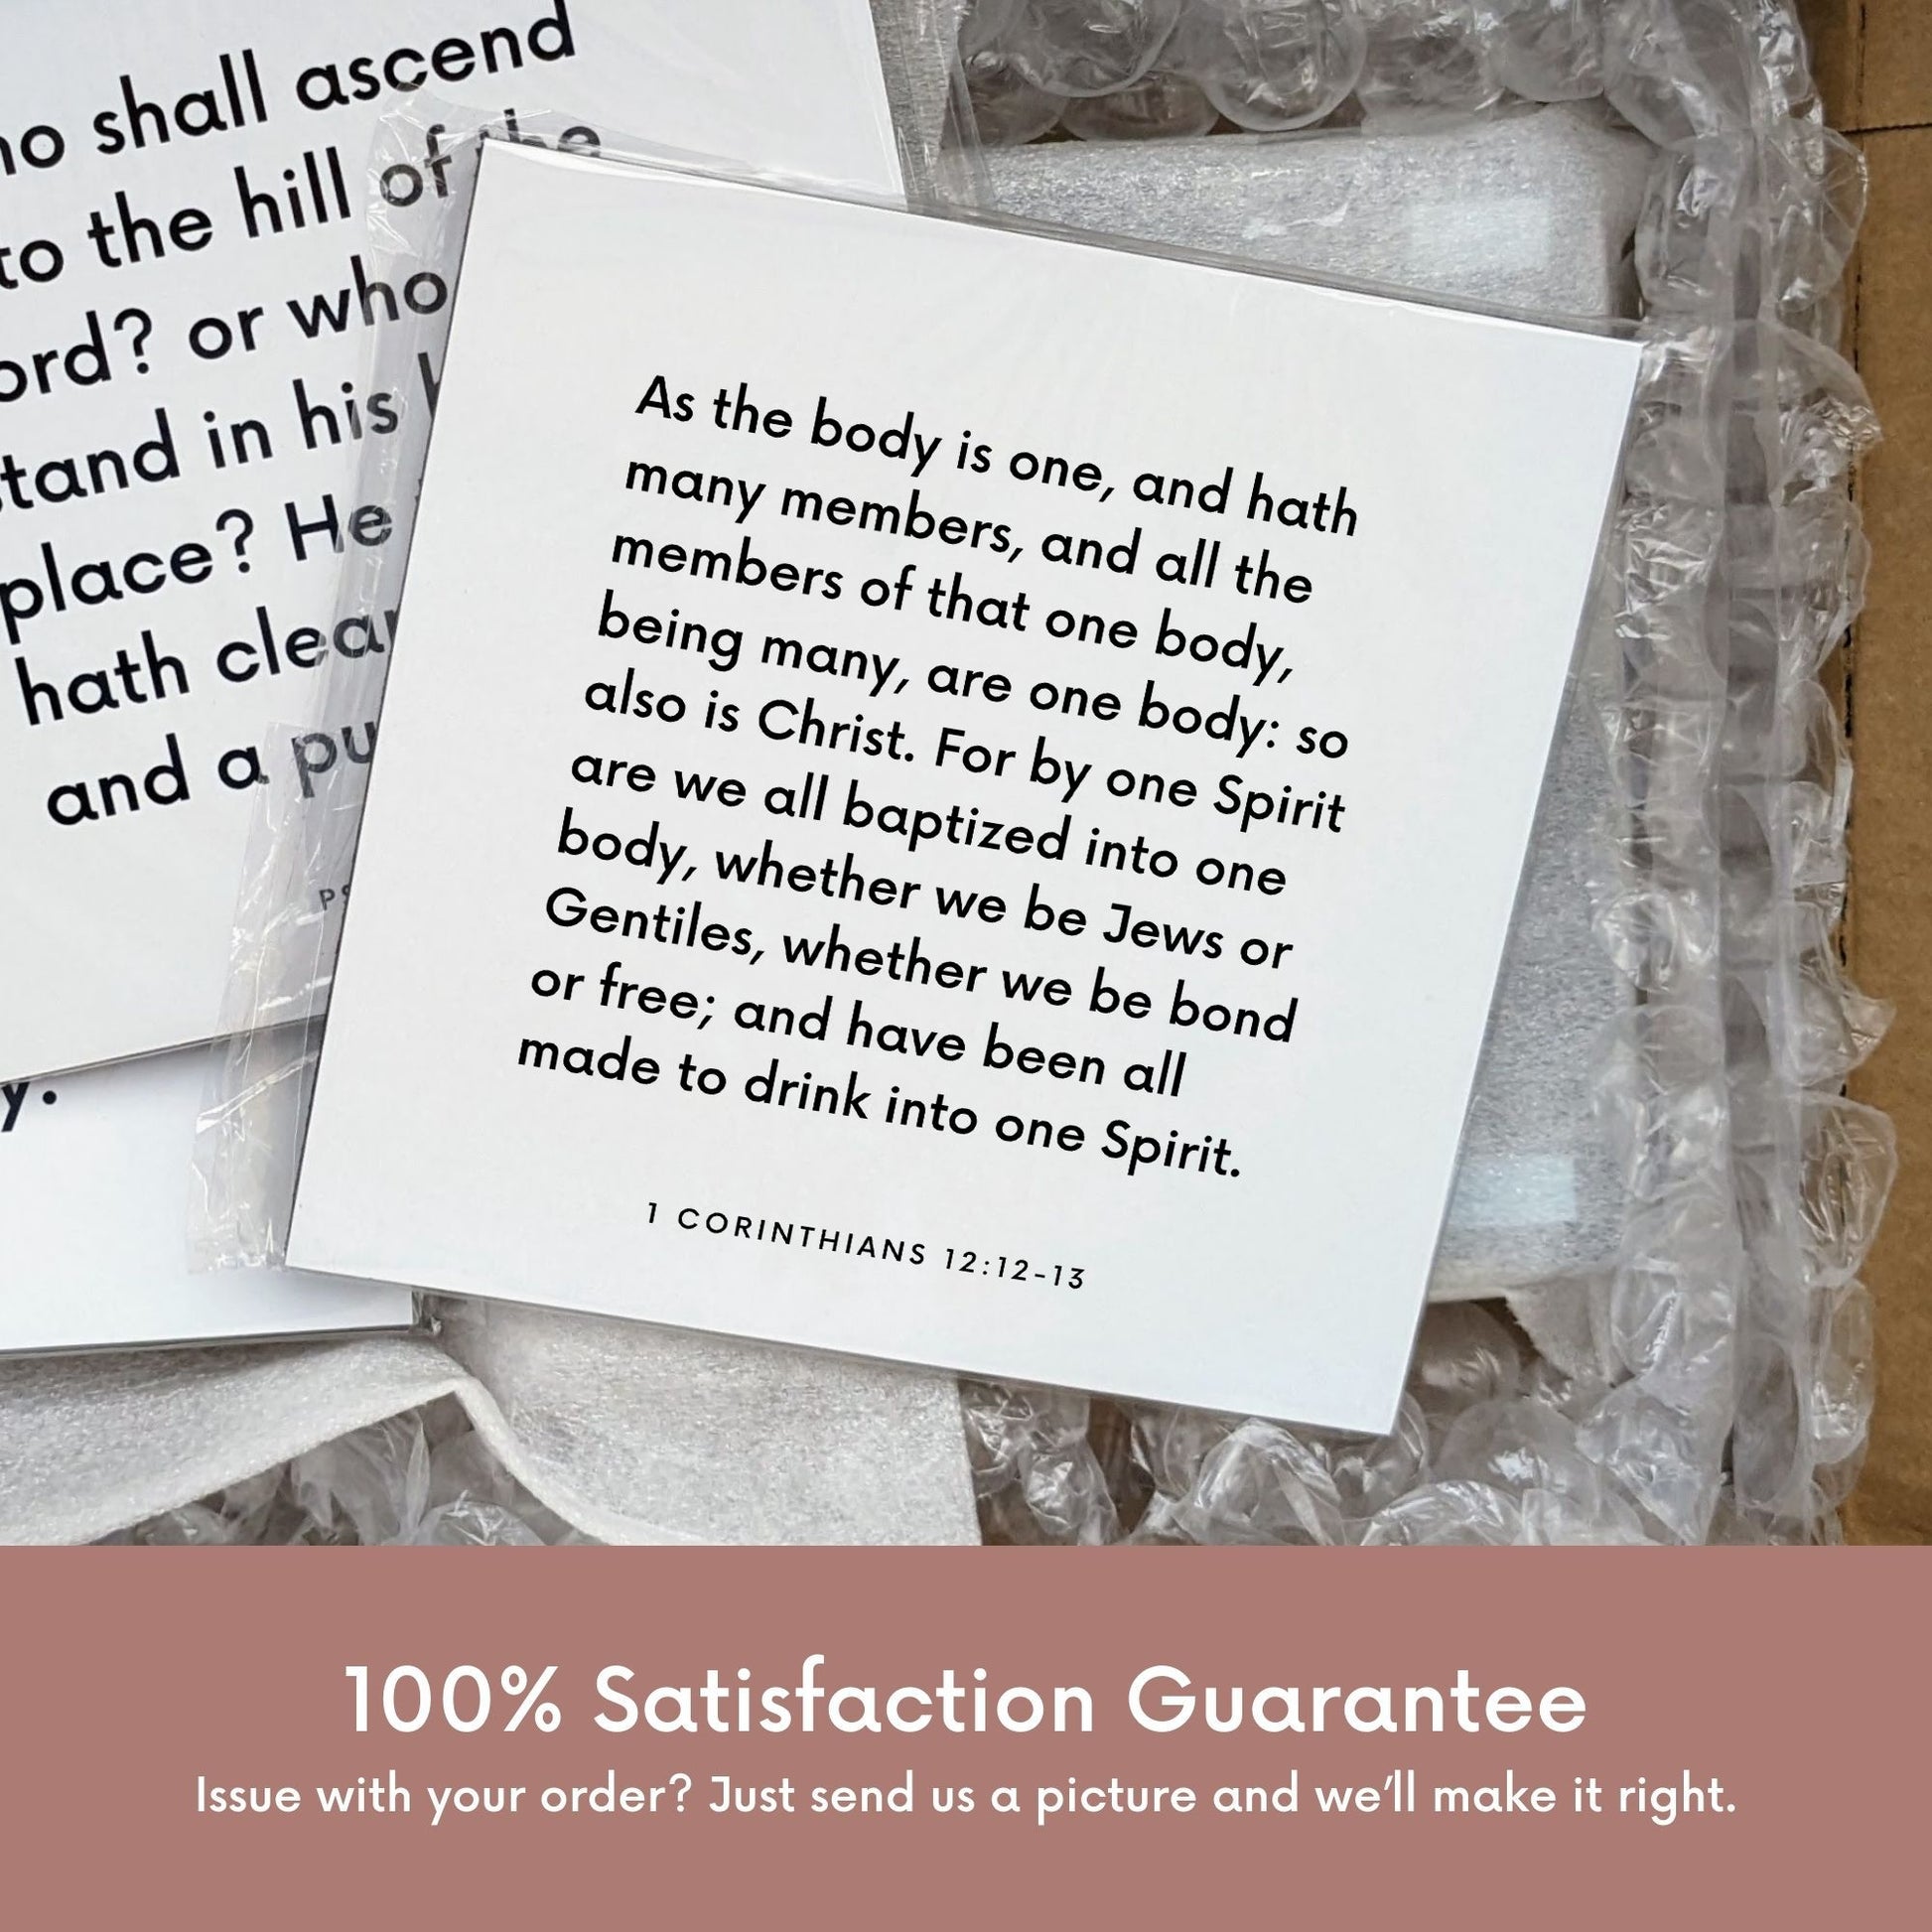 Shipping materials for scripture tile of 1 Corinthians 12:12-13 - "By one Spirit are we all baptized into one body"